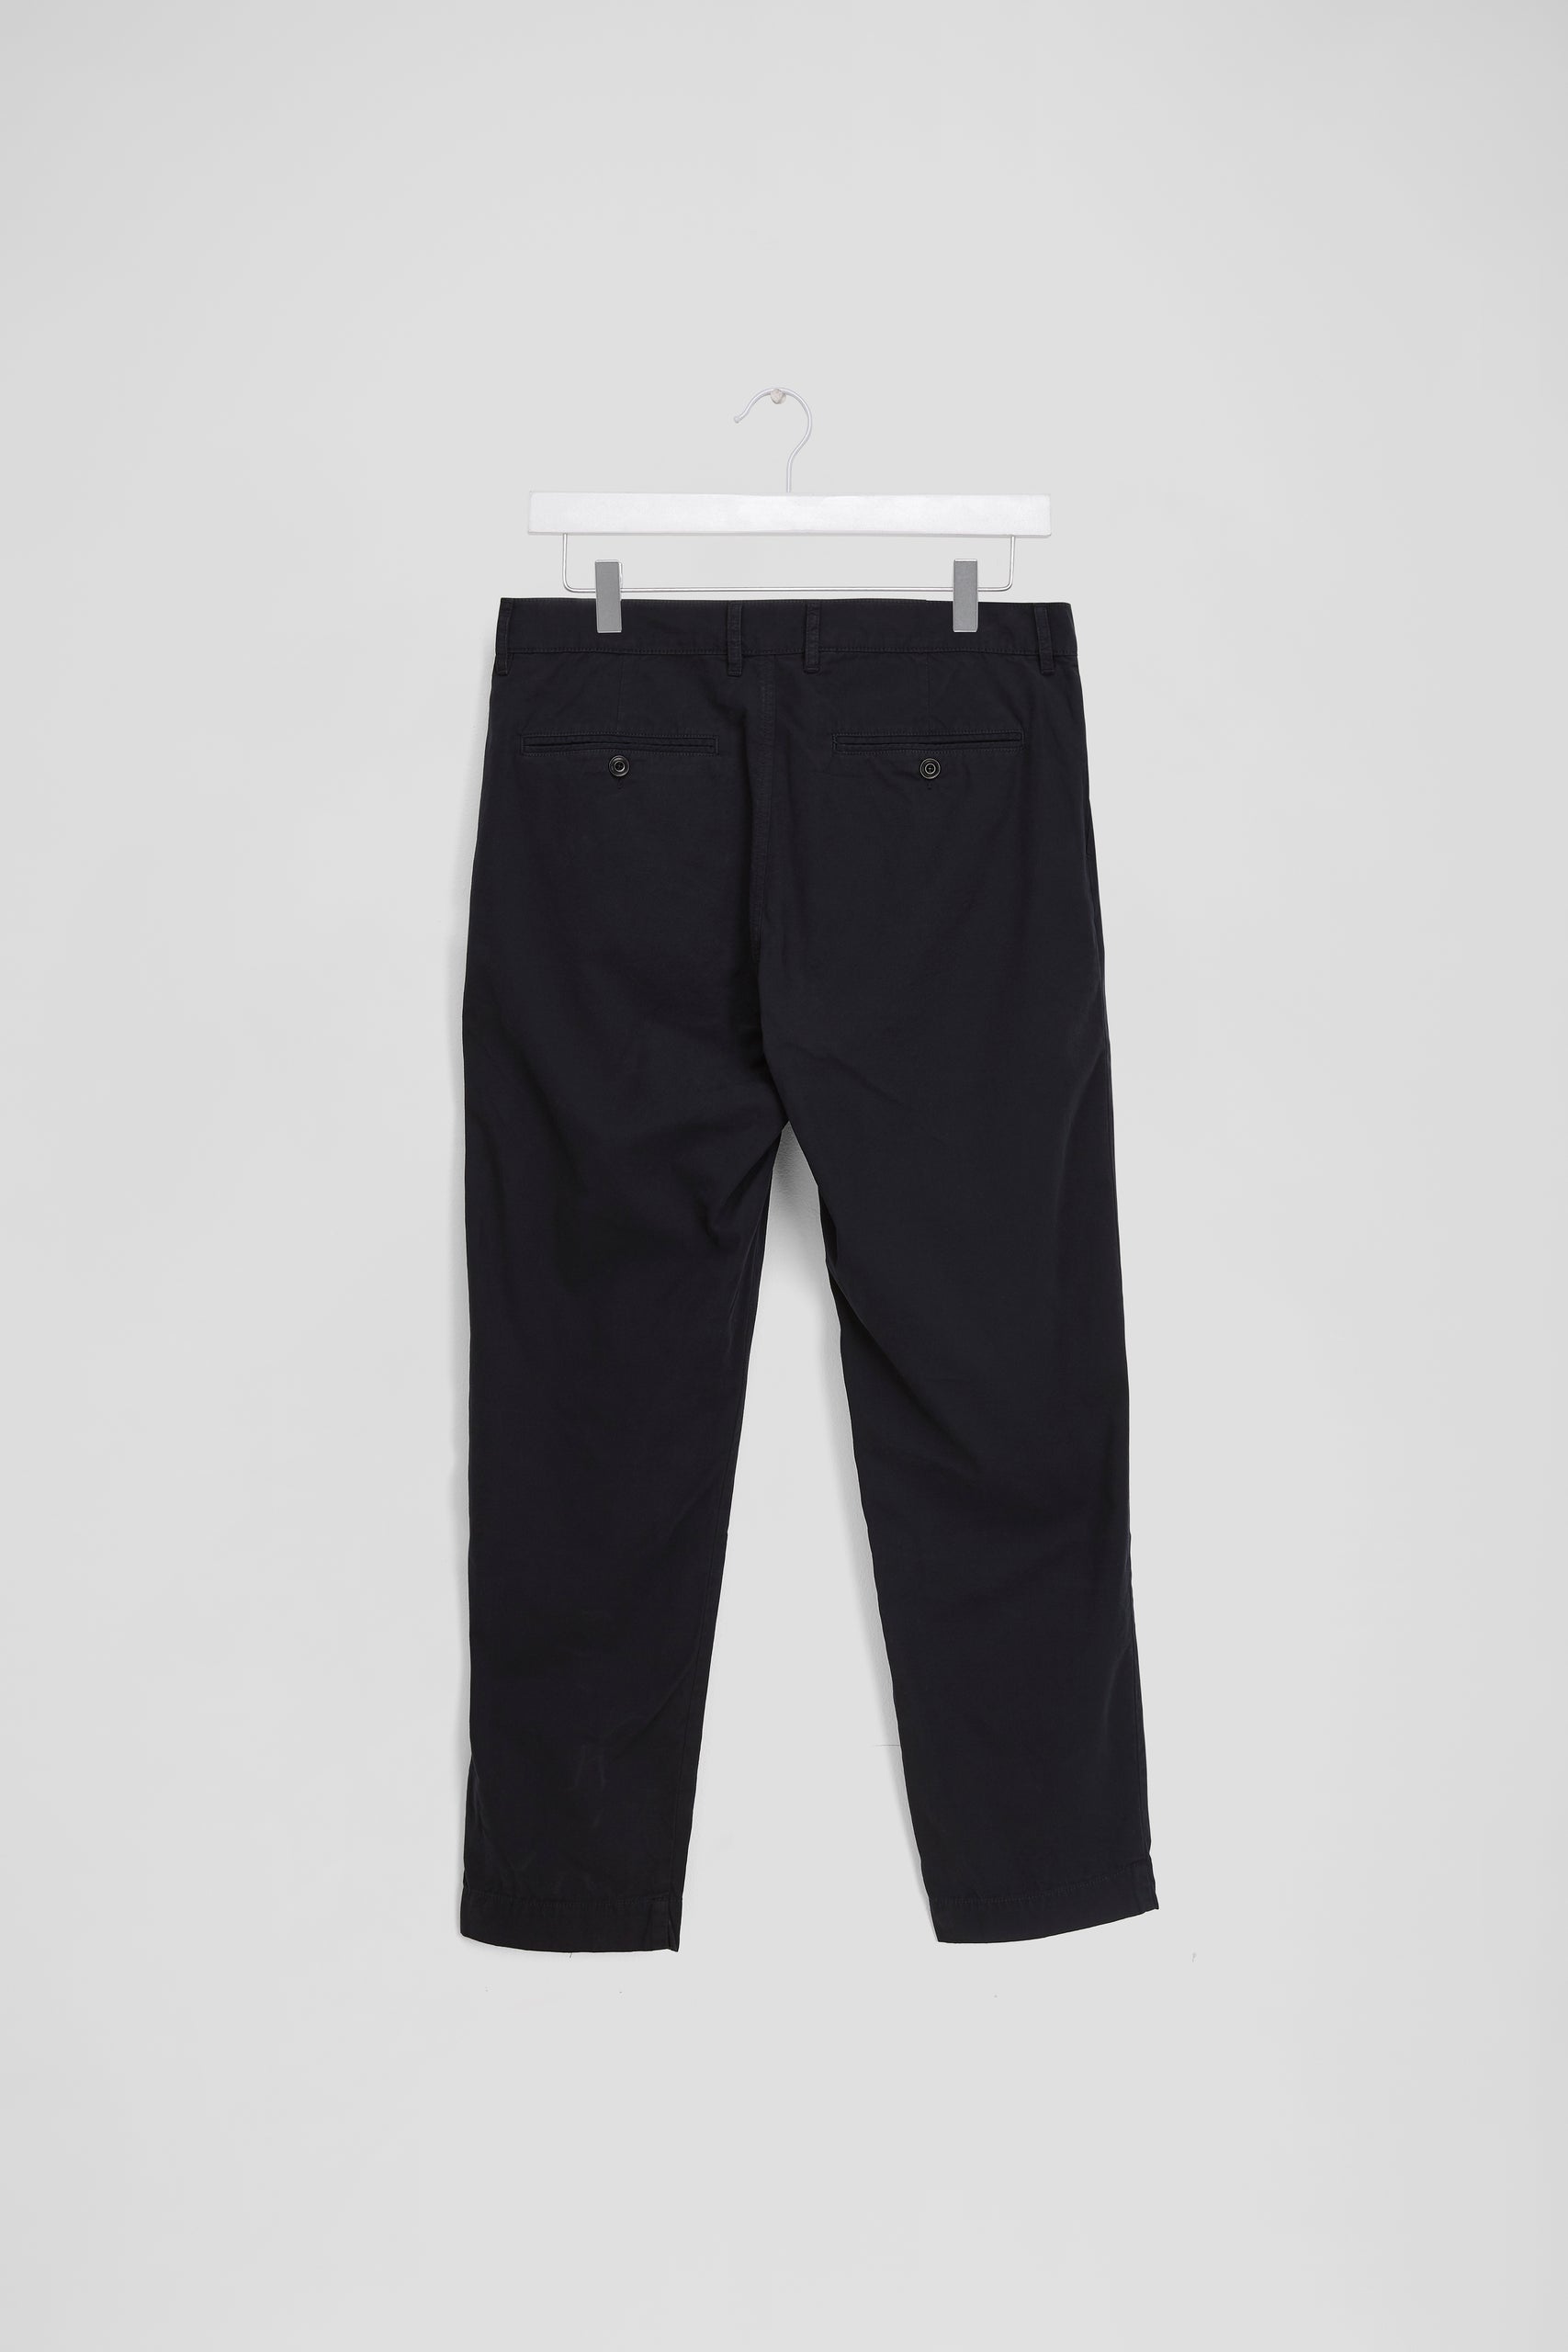 Navy Pleated Trousers by Maison Margiela on Sale